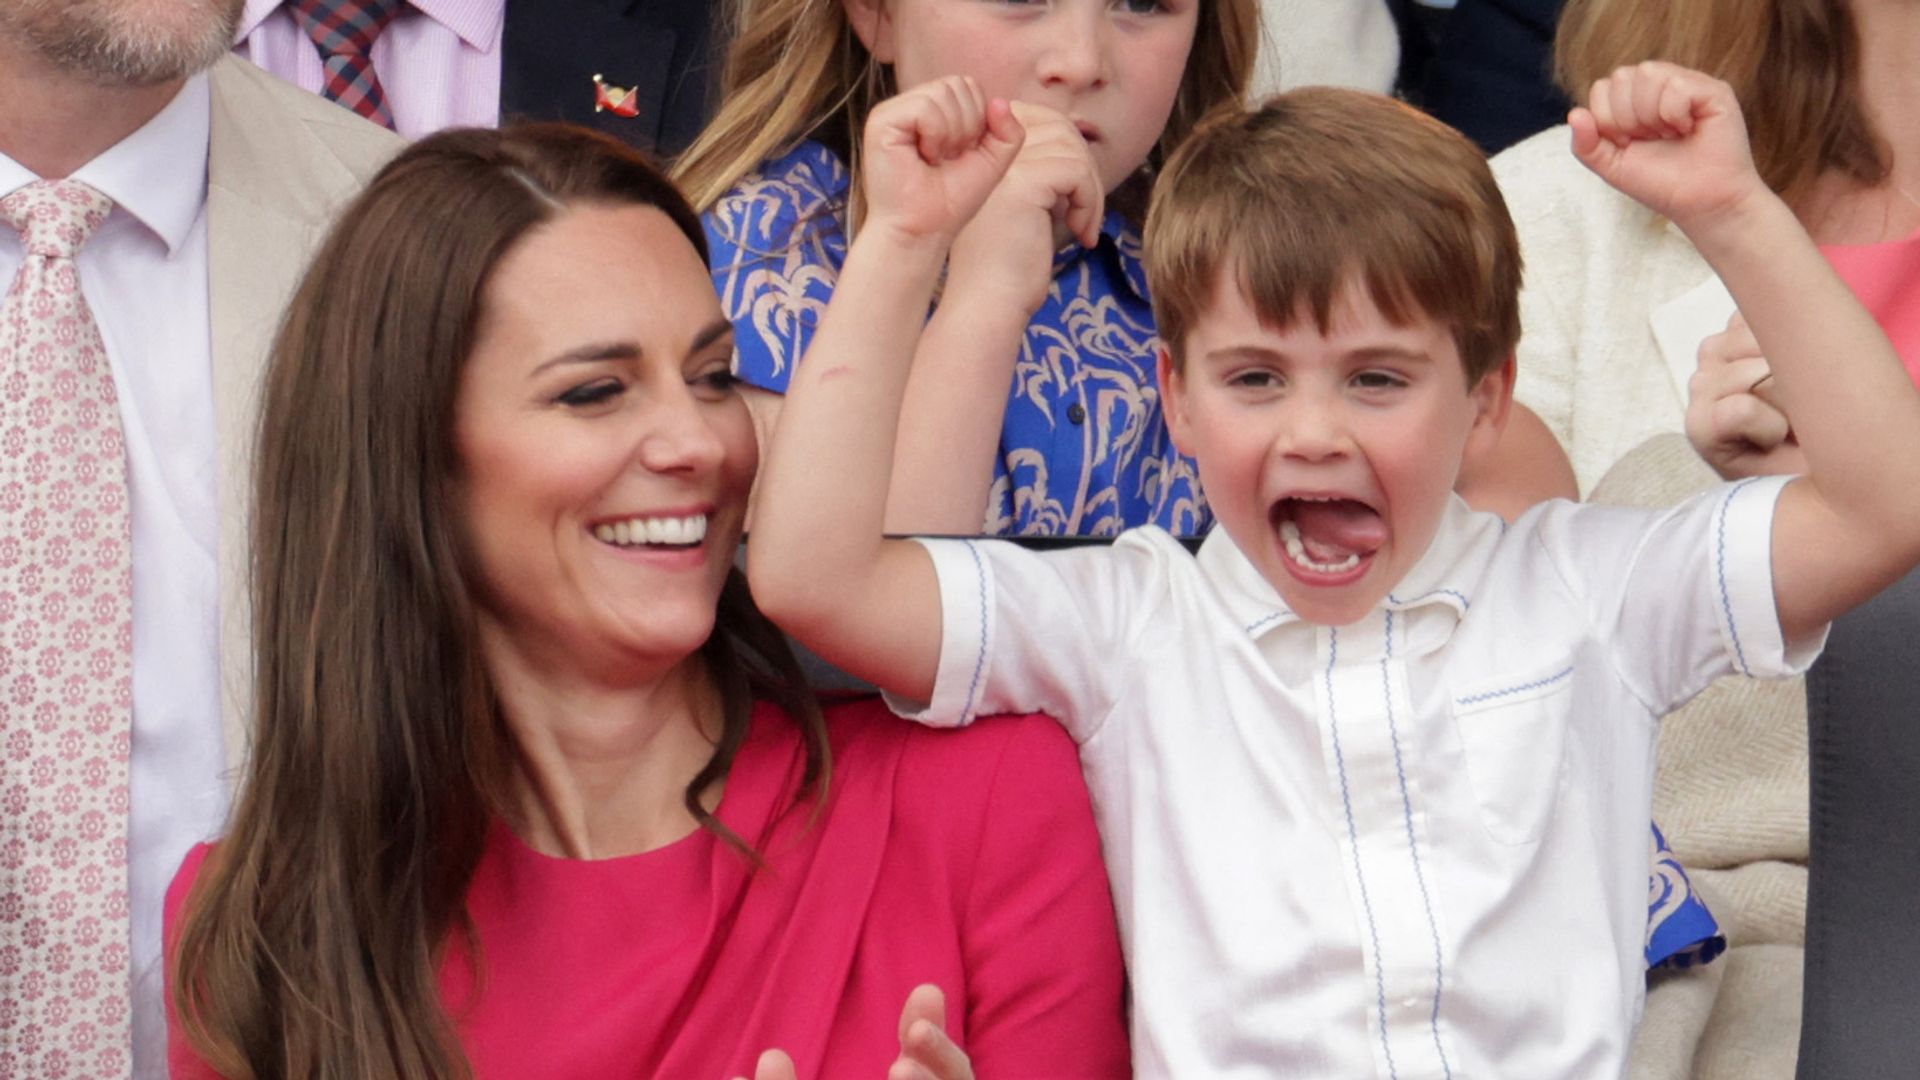 Princess Kate clapping beside her son Prince Louis, who has his arms in the air